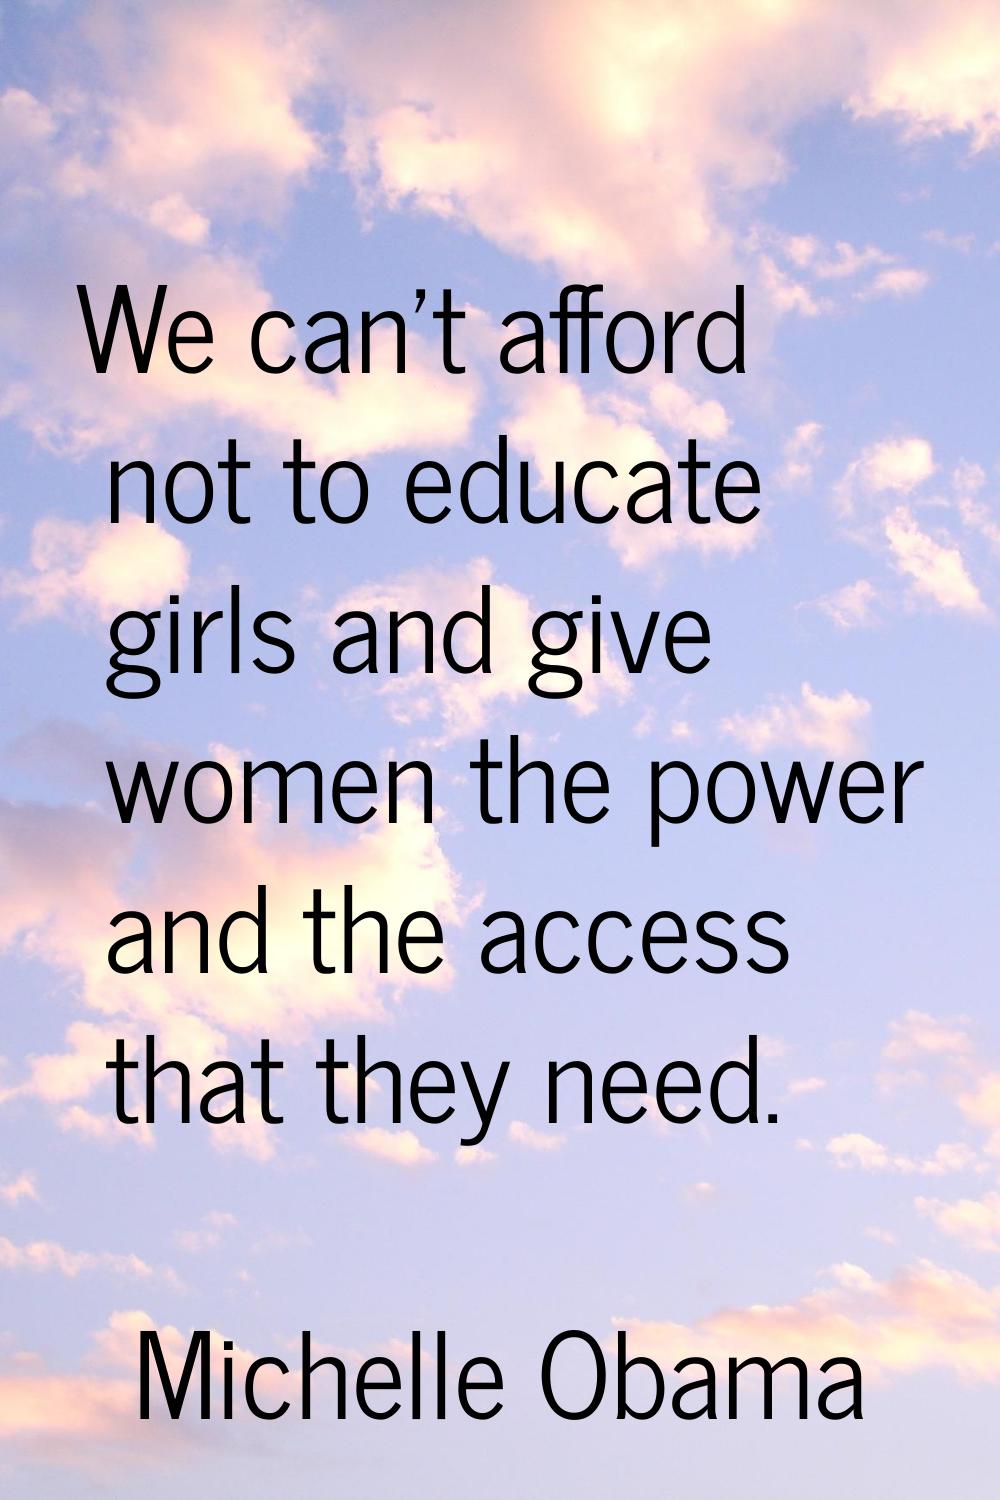 We can't afford not to educate girls and give women the power and the access that they need.